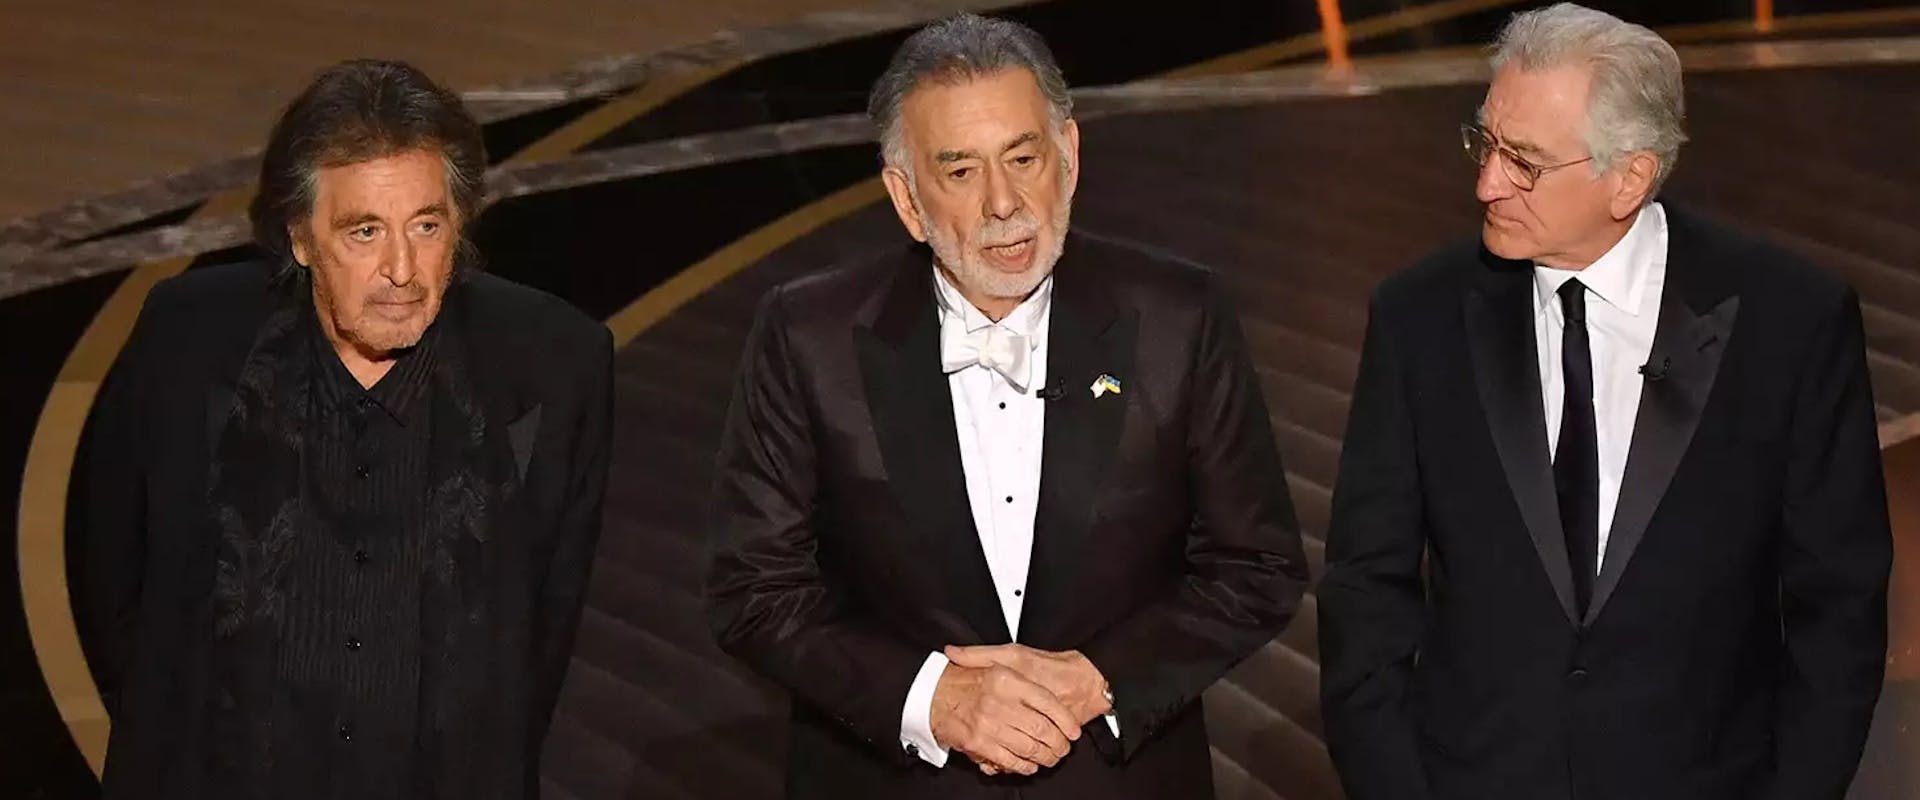 Al Pacino, Francis Ford Coppola, and Robert De Niro onstage during the 94th Academy Awards ceremony, presented by the Academy of Motion Picture Arts and Sciences, at the Dolby Theatre in Los Angeles on March 27, 2022